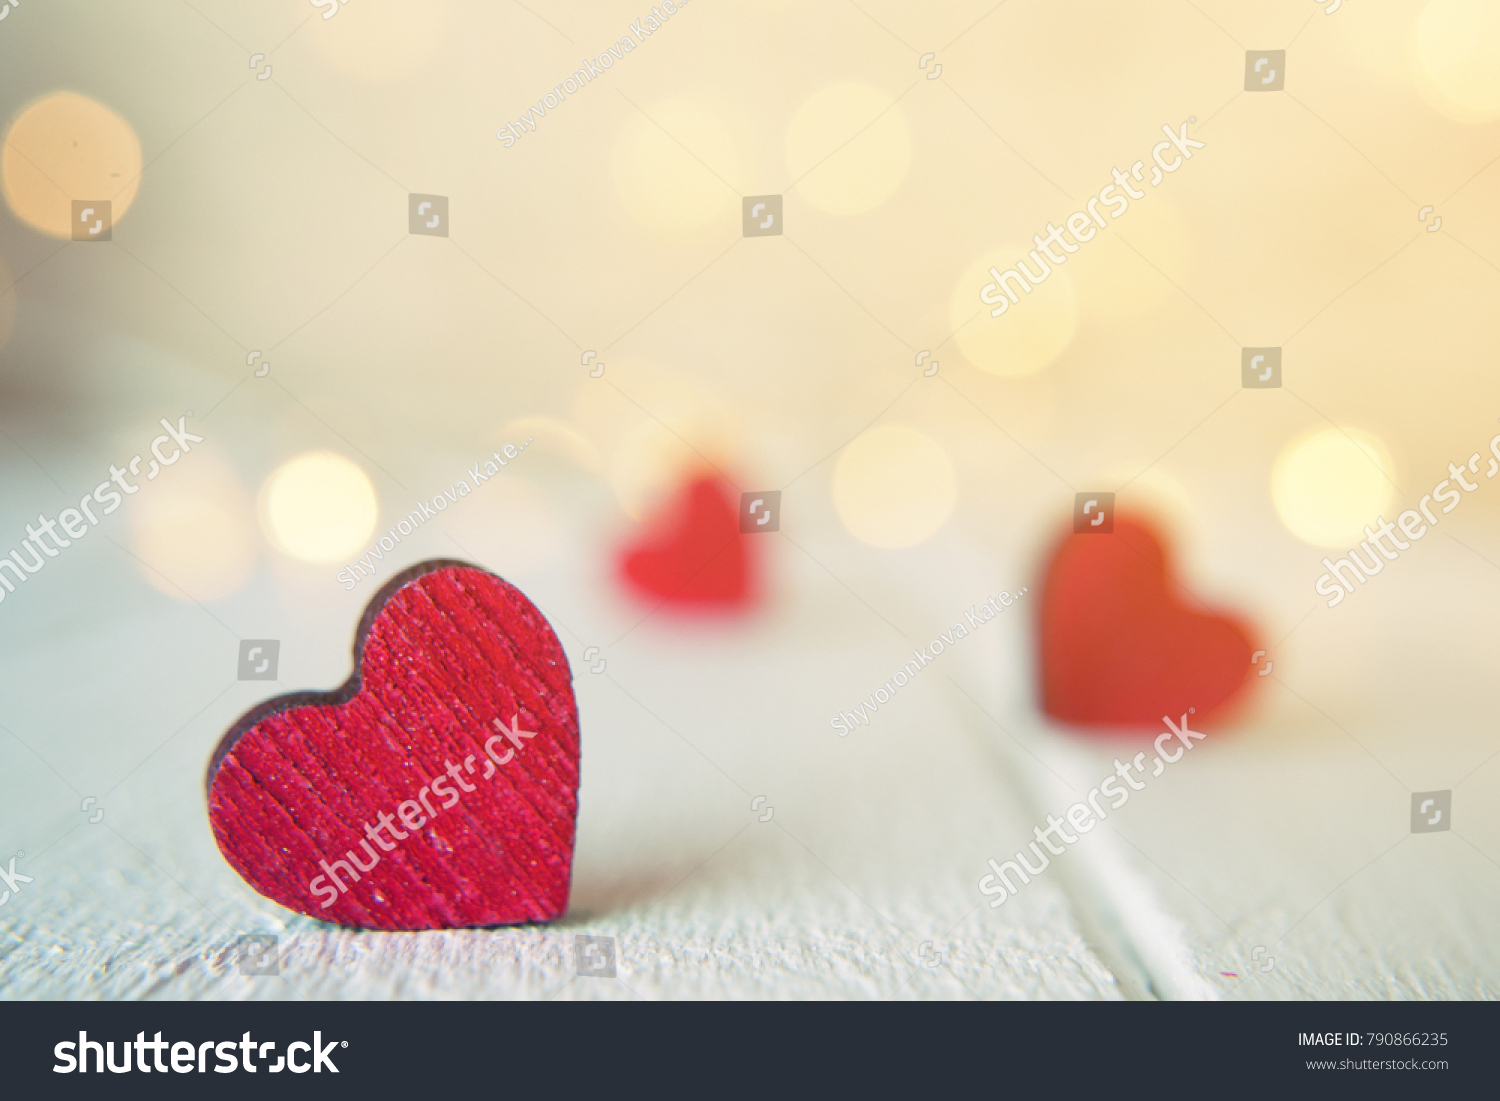 Close up of red hearts on wooden table against defocused lights. St. Valentine's Day background #790866235